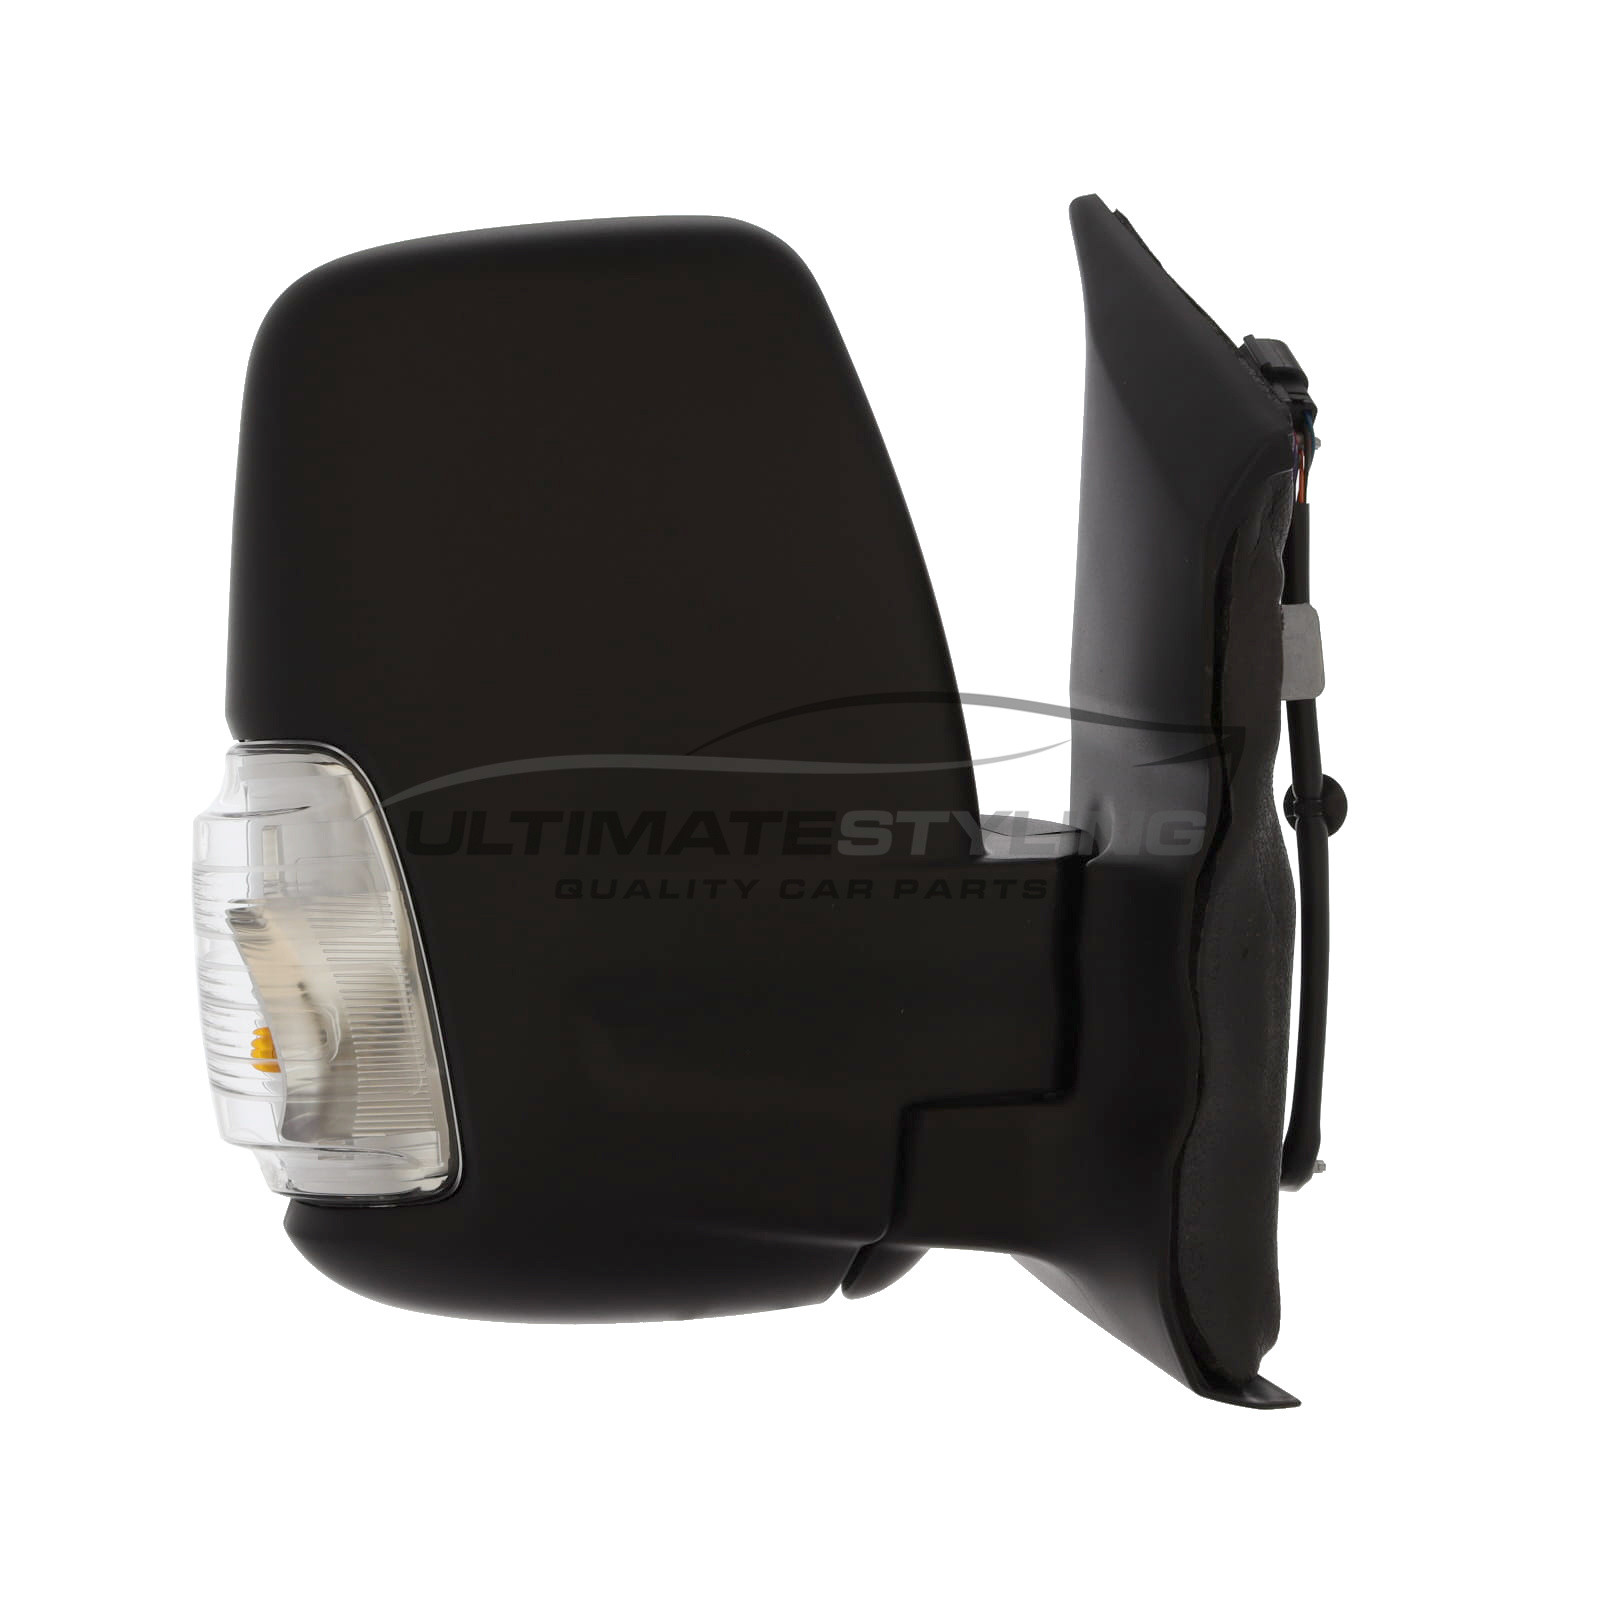 Ford Transit Wing Mirror / Door Mirror - Drivers Side (RH) - Electric adjustment - Heated Glass - Power Folding - Indicator - Black - Textured